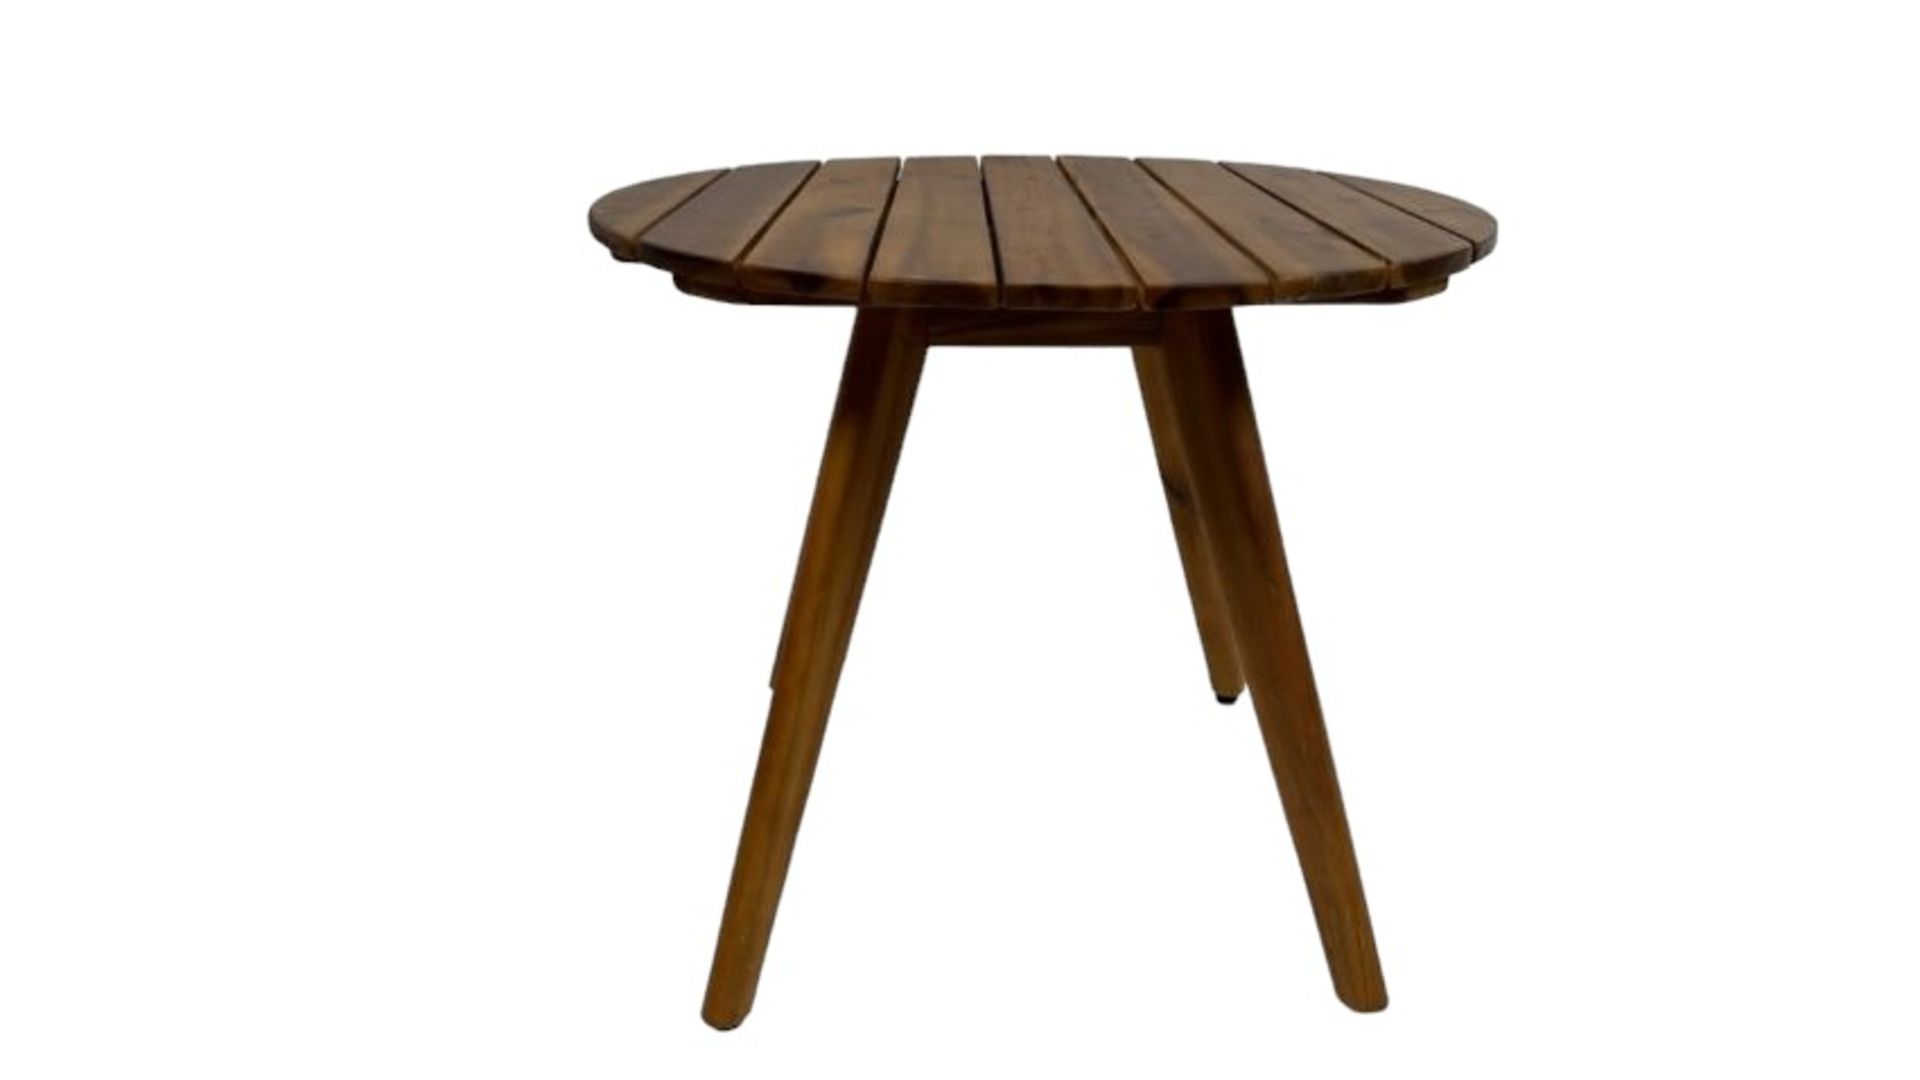 Wooden Circular Side Table